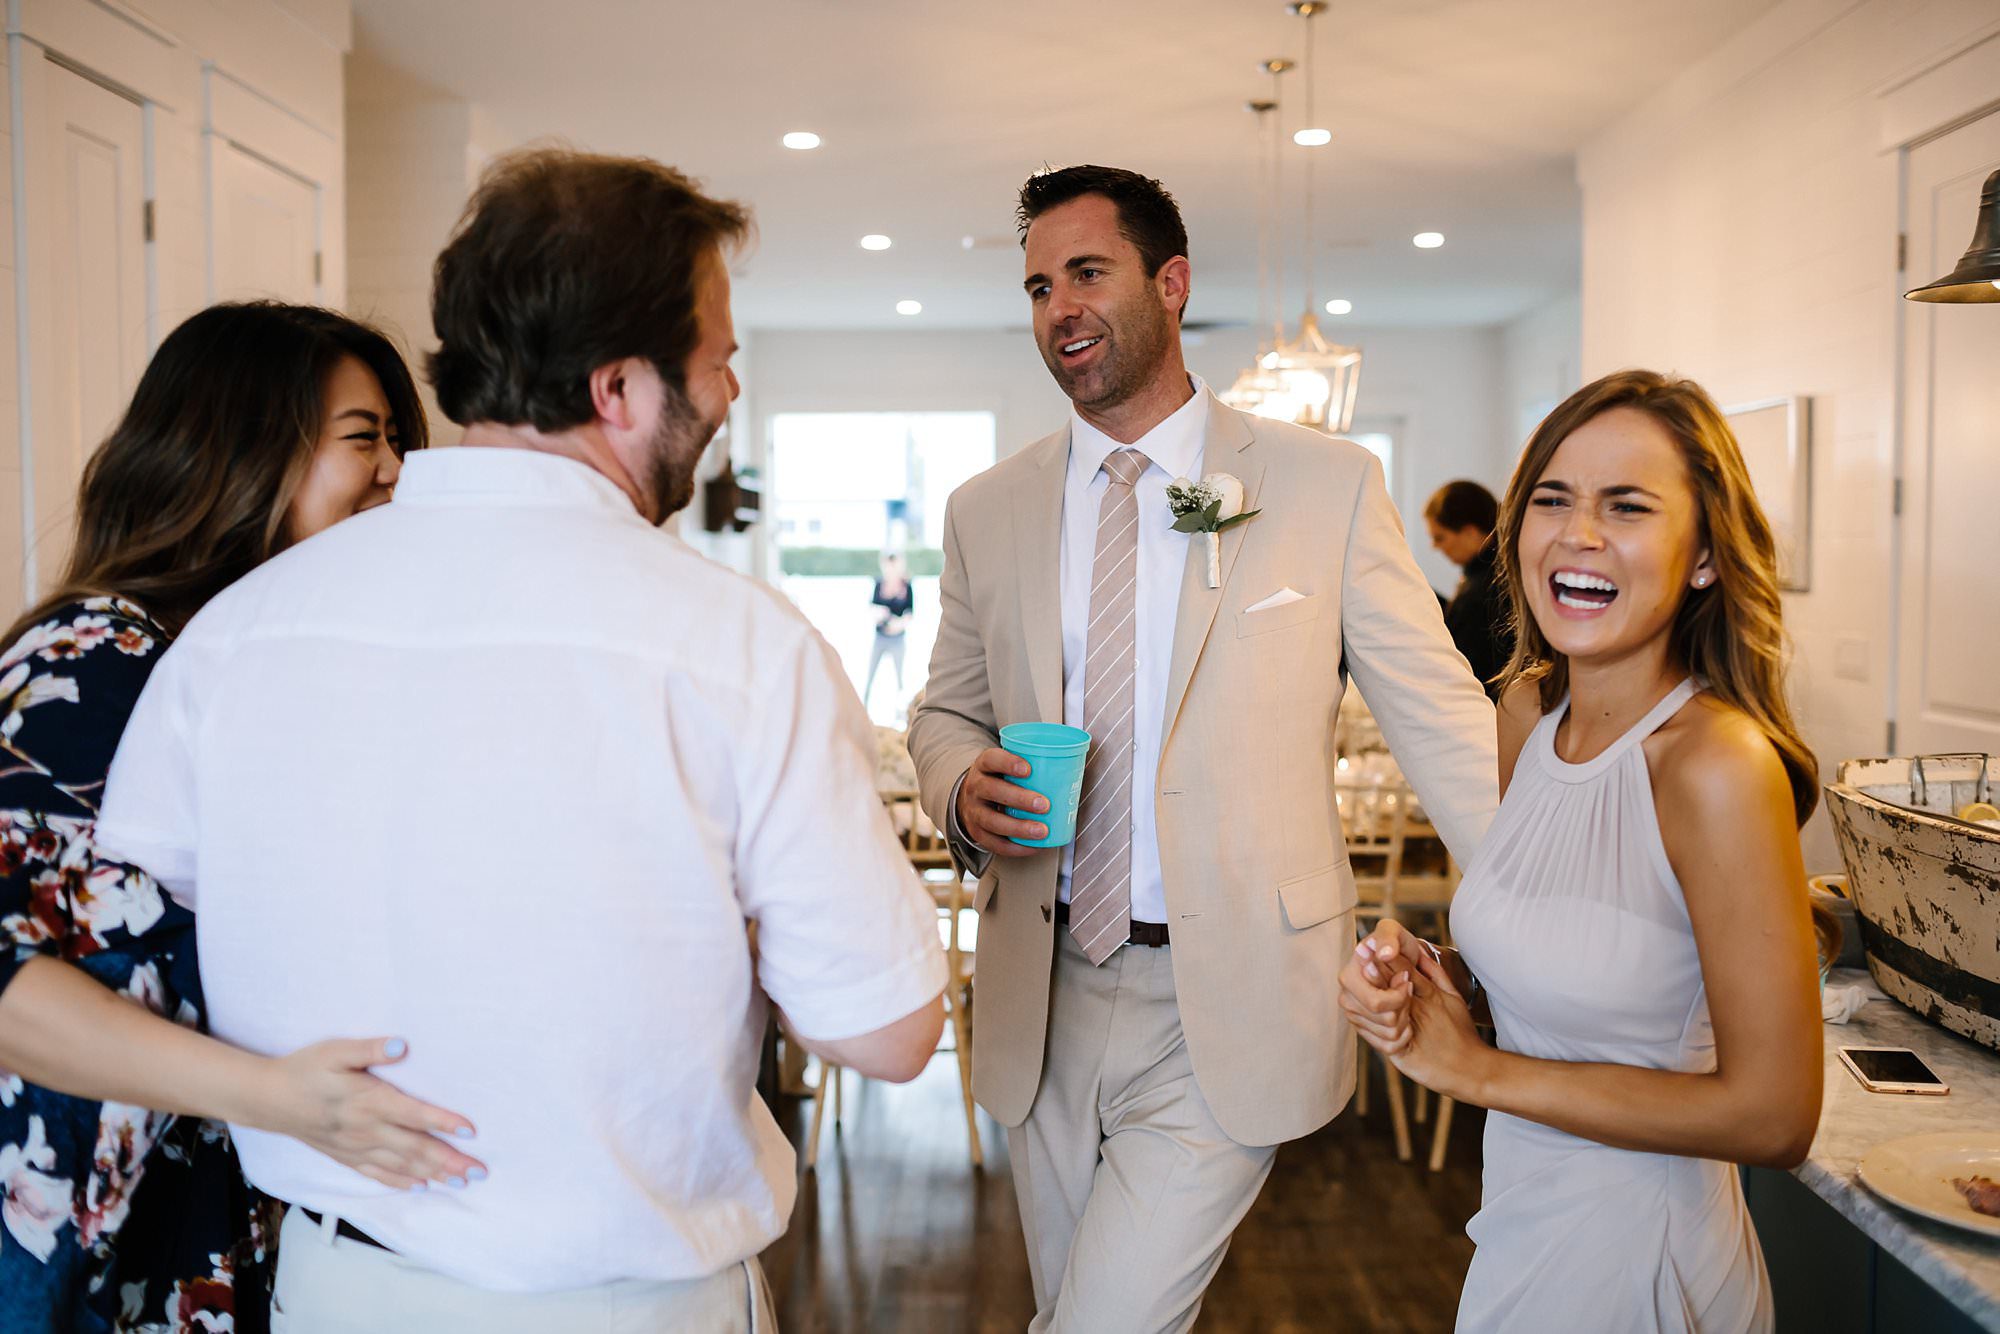 Groom entertains guests during cocktail hour